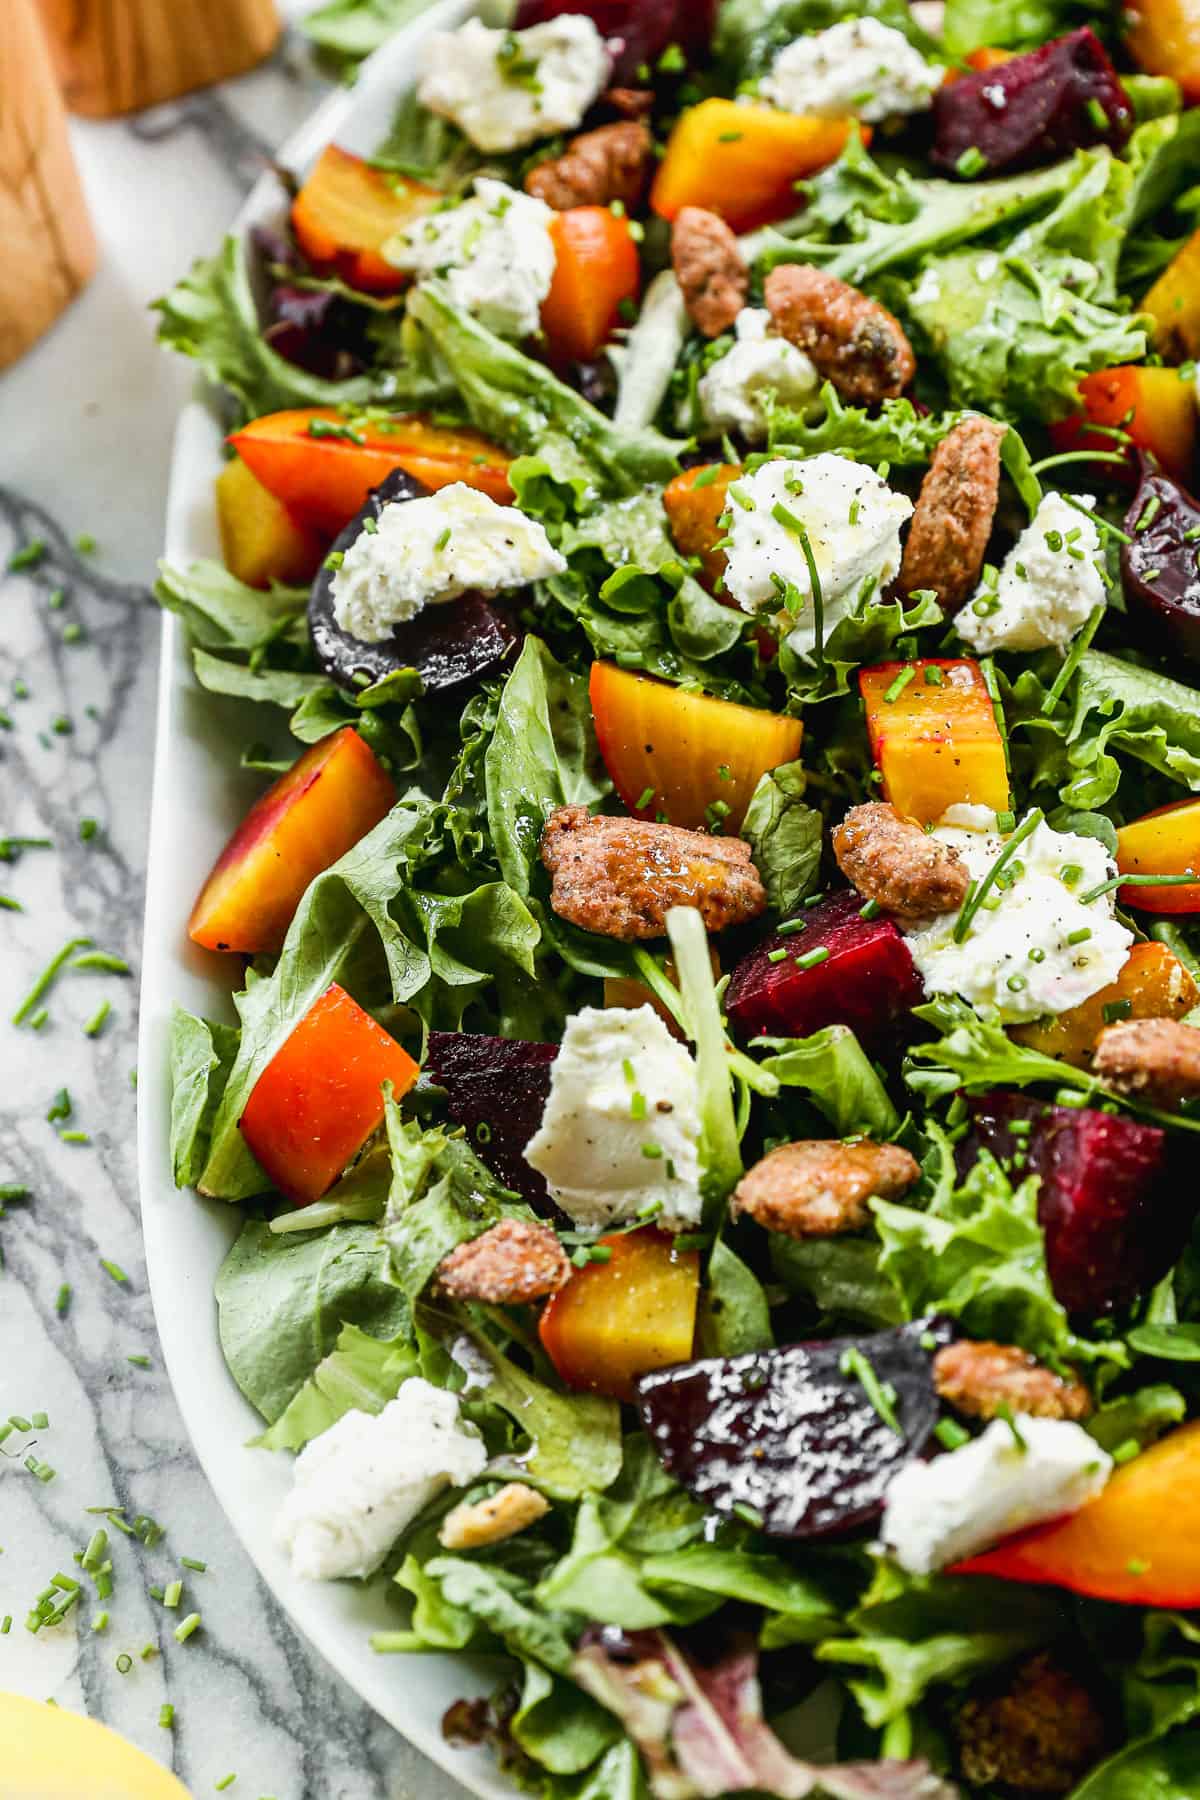 A close up image of an easy beet salad with roasted beets, walnuts, and whipped goat cheese.